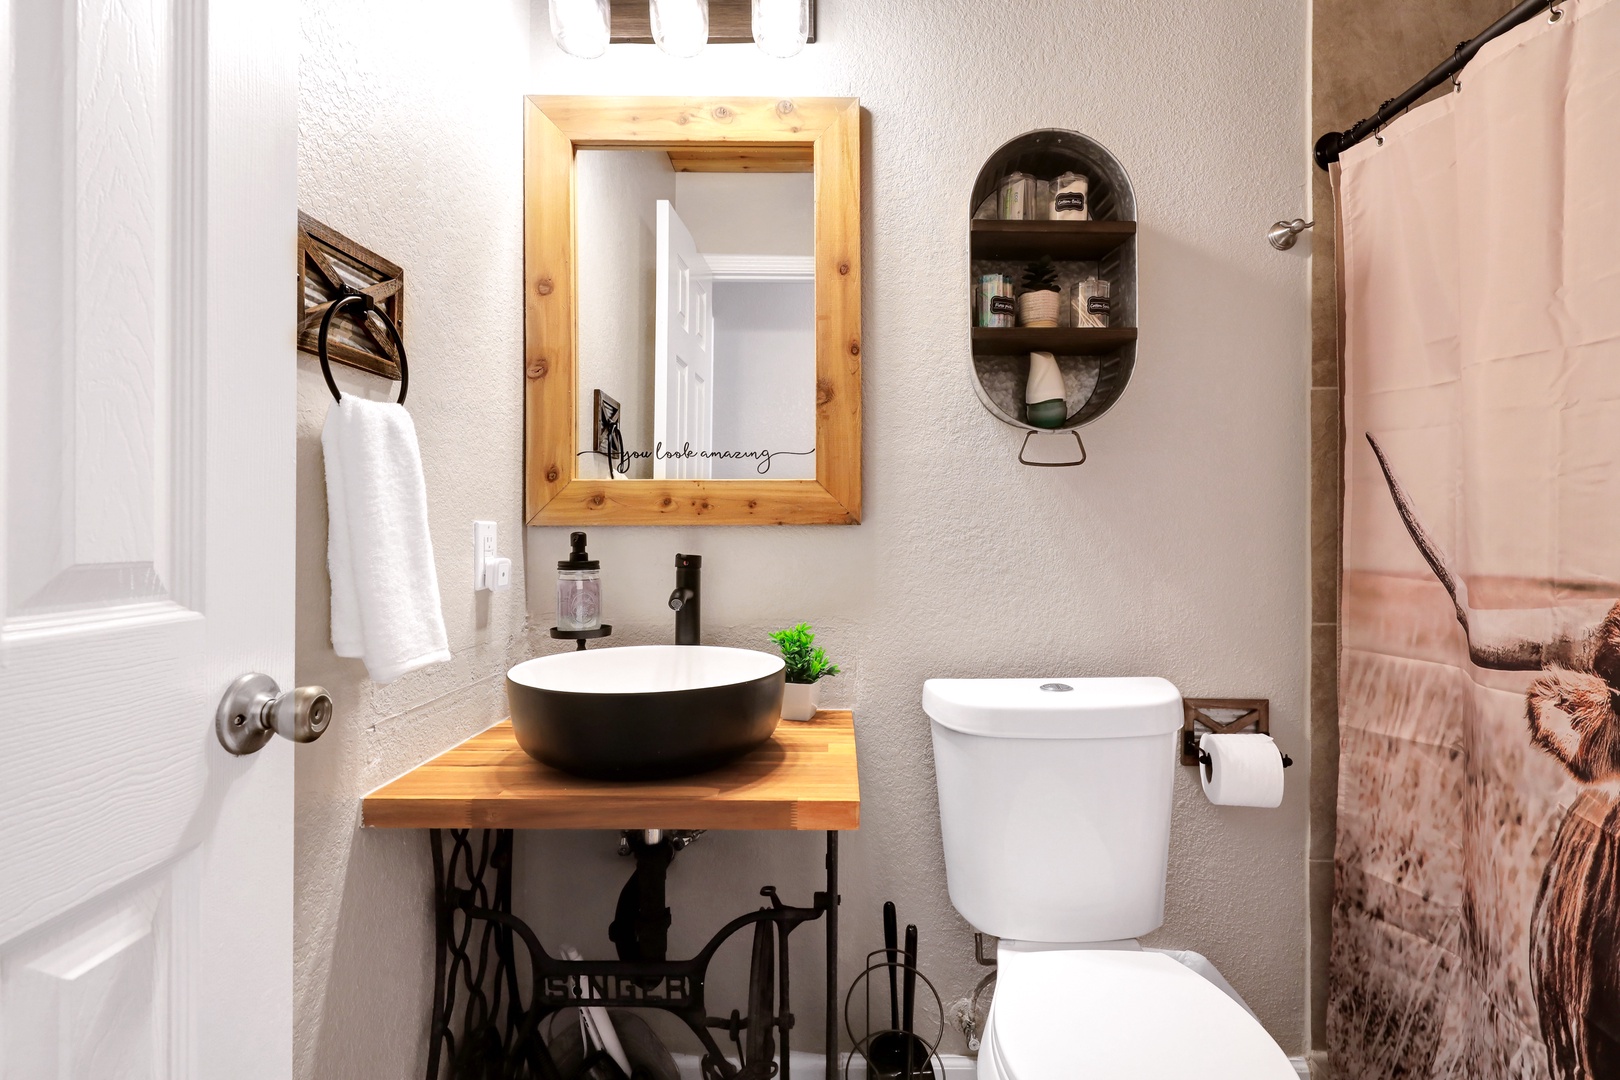 The 1st of 2 full bathrooms offers a stylish vanity & shower/tub combo